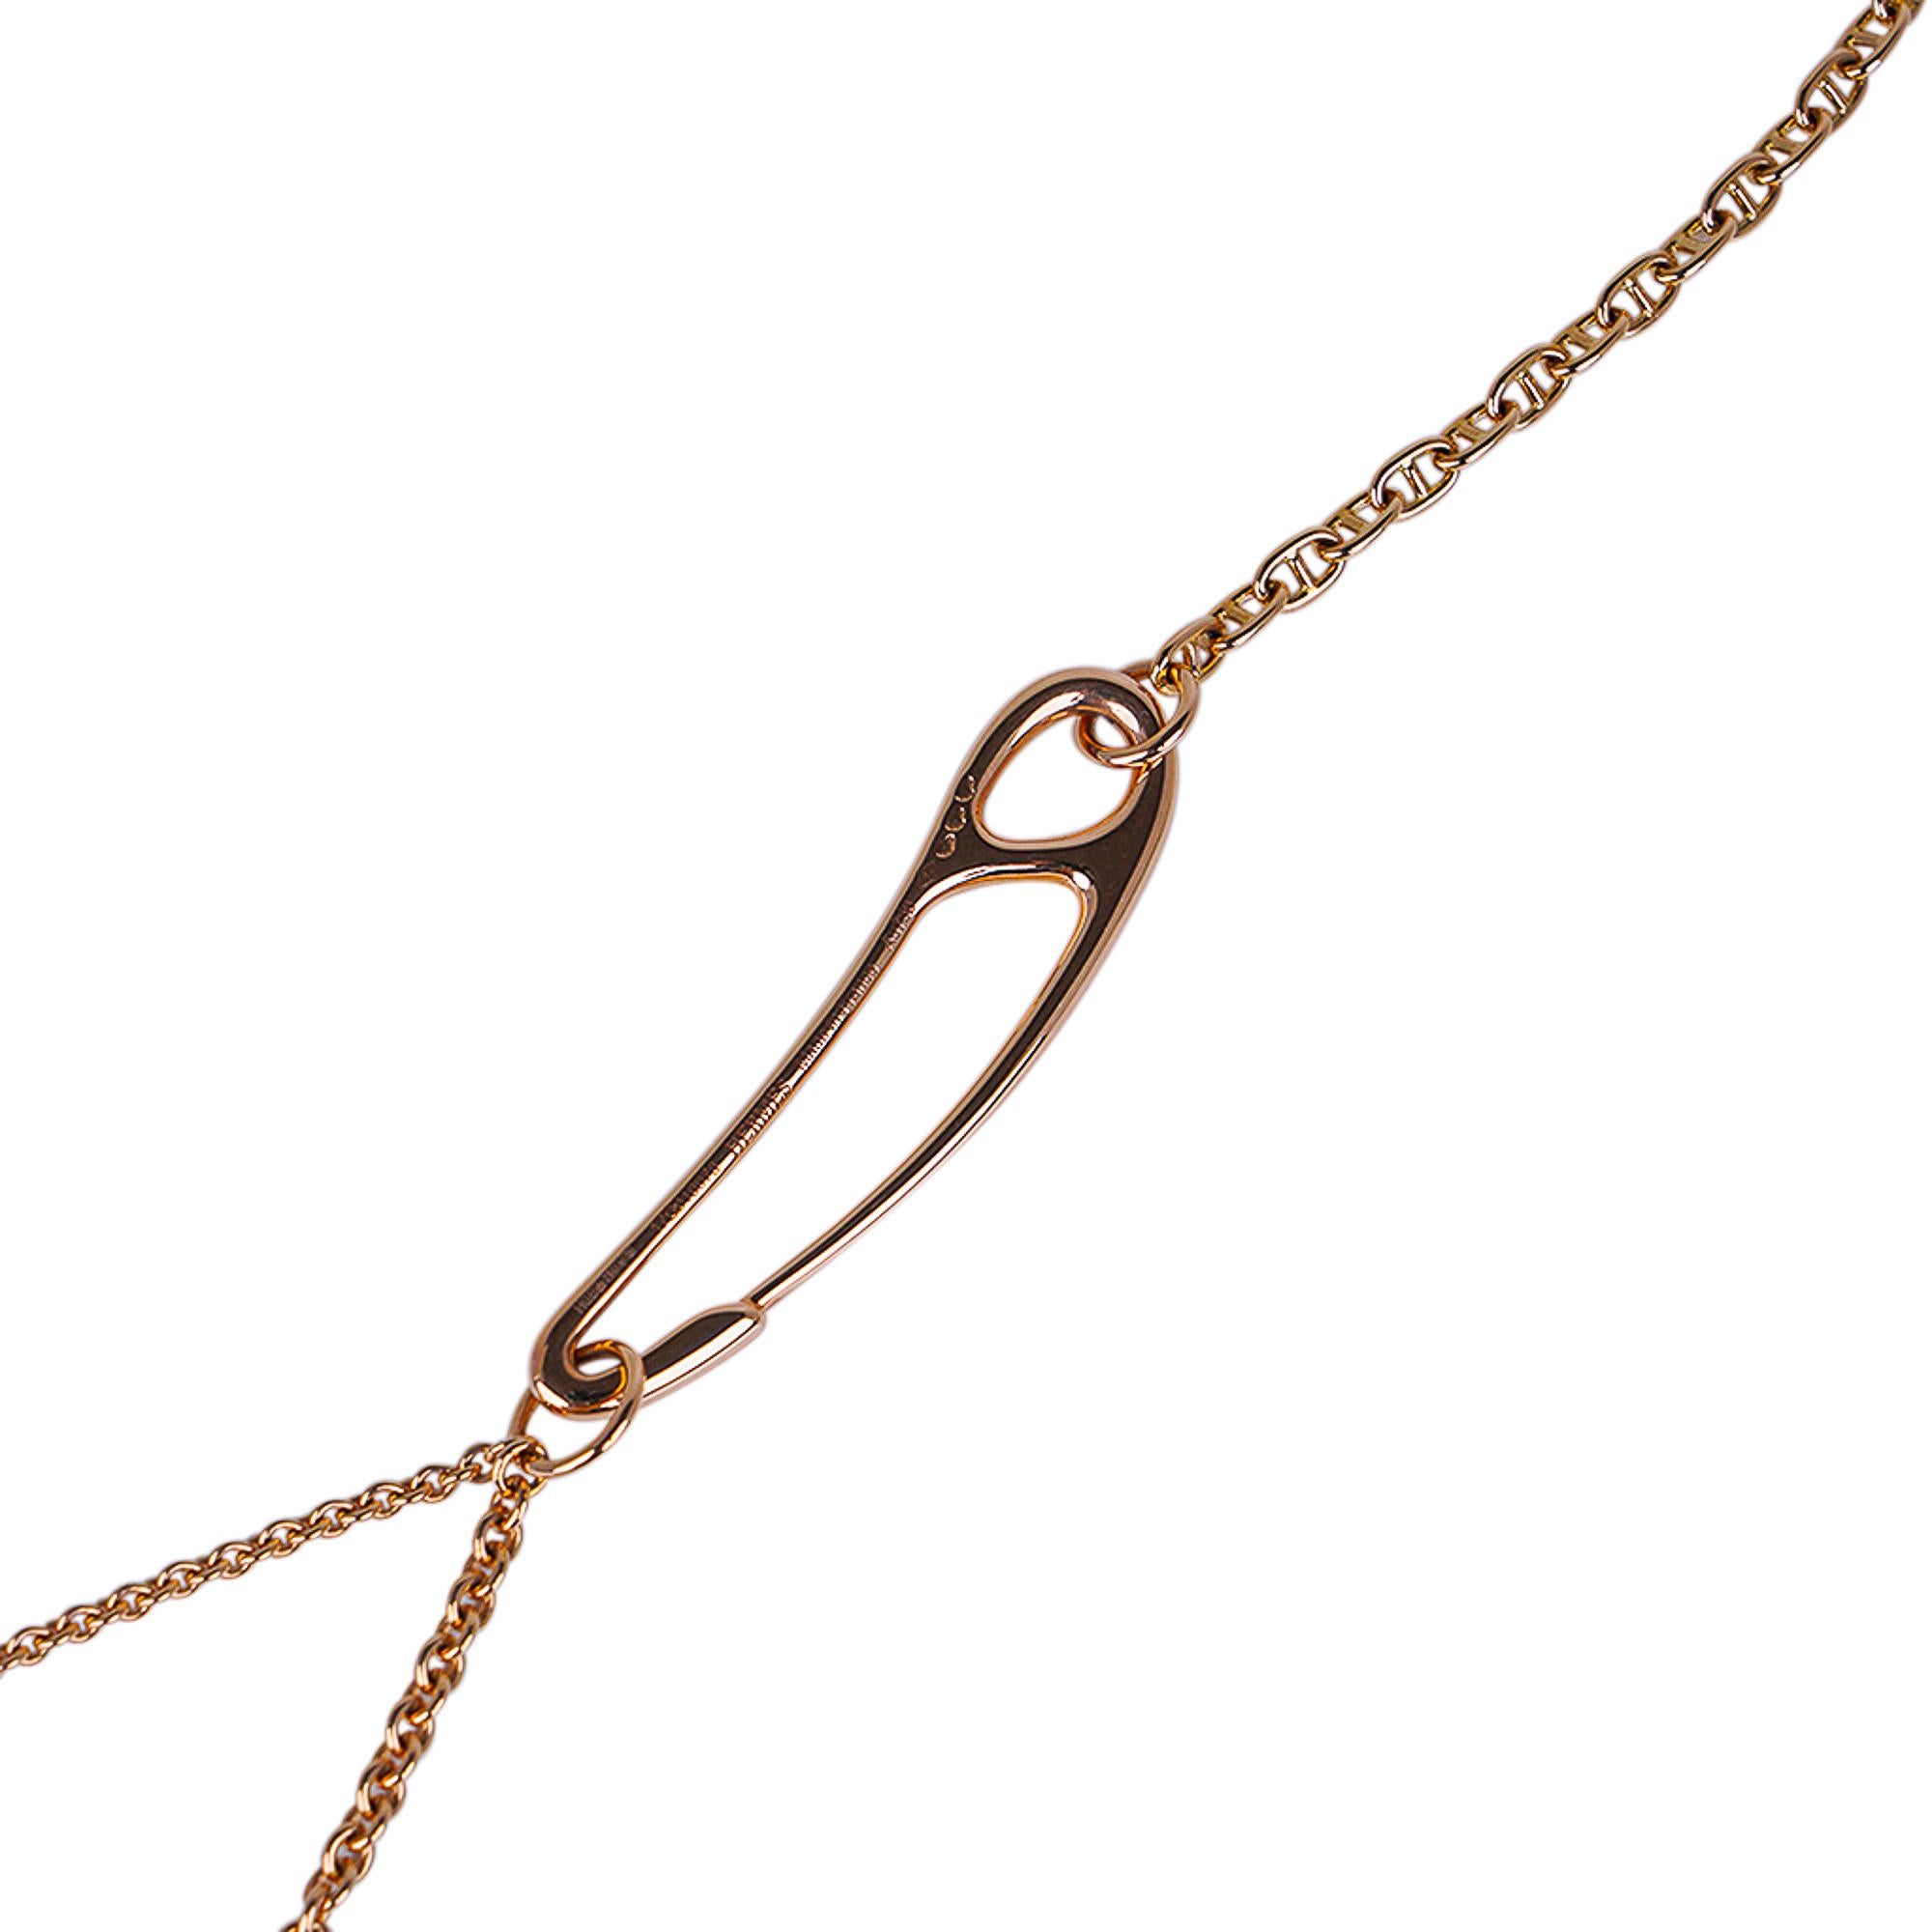 Mightychic offers an Hermes Chaine D'Ancre Punk necklace featured in 18K Rose Gold.
Set with 1 diamond.
A play on the Chaine D'Ancre, the link is stretched and shaped as a safety pin.
A modern take on the iconic link!
Toggle closure.
Beautiful and